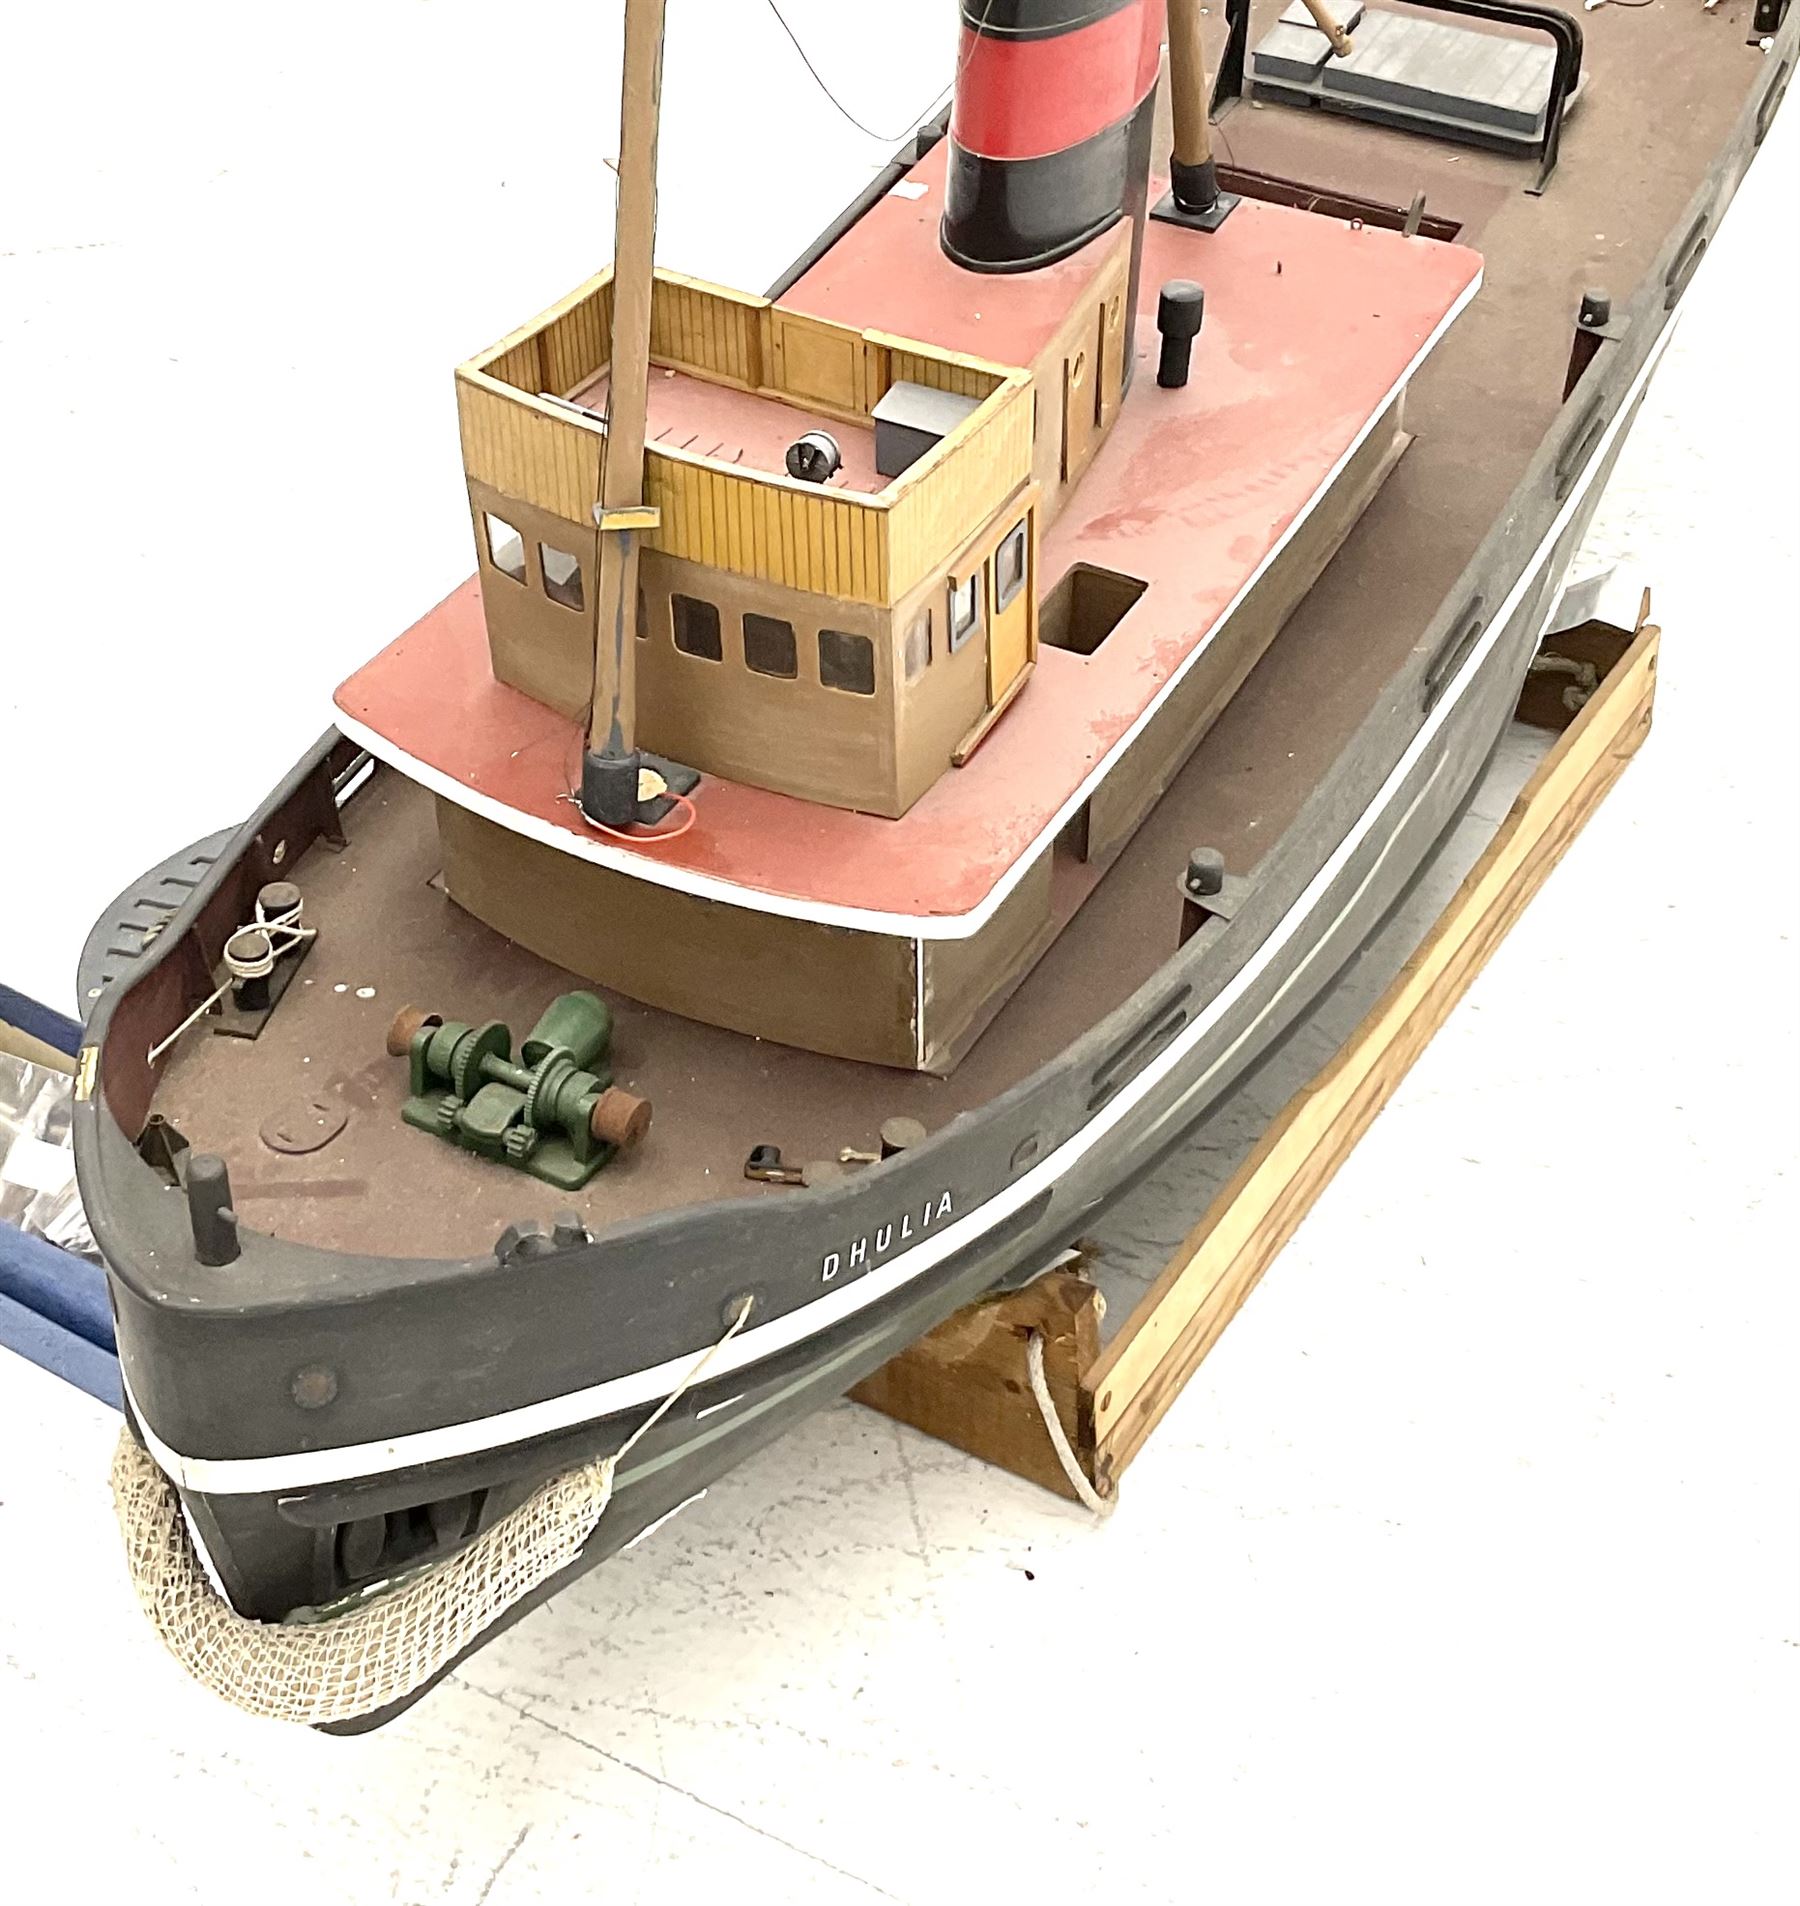 Large model of the tugboat 'Dhulia' on a wooden stand L144cm - Image 9 of 14